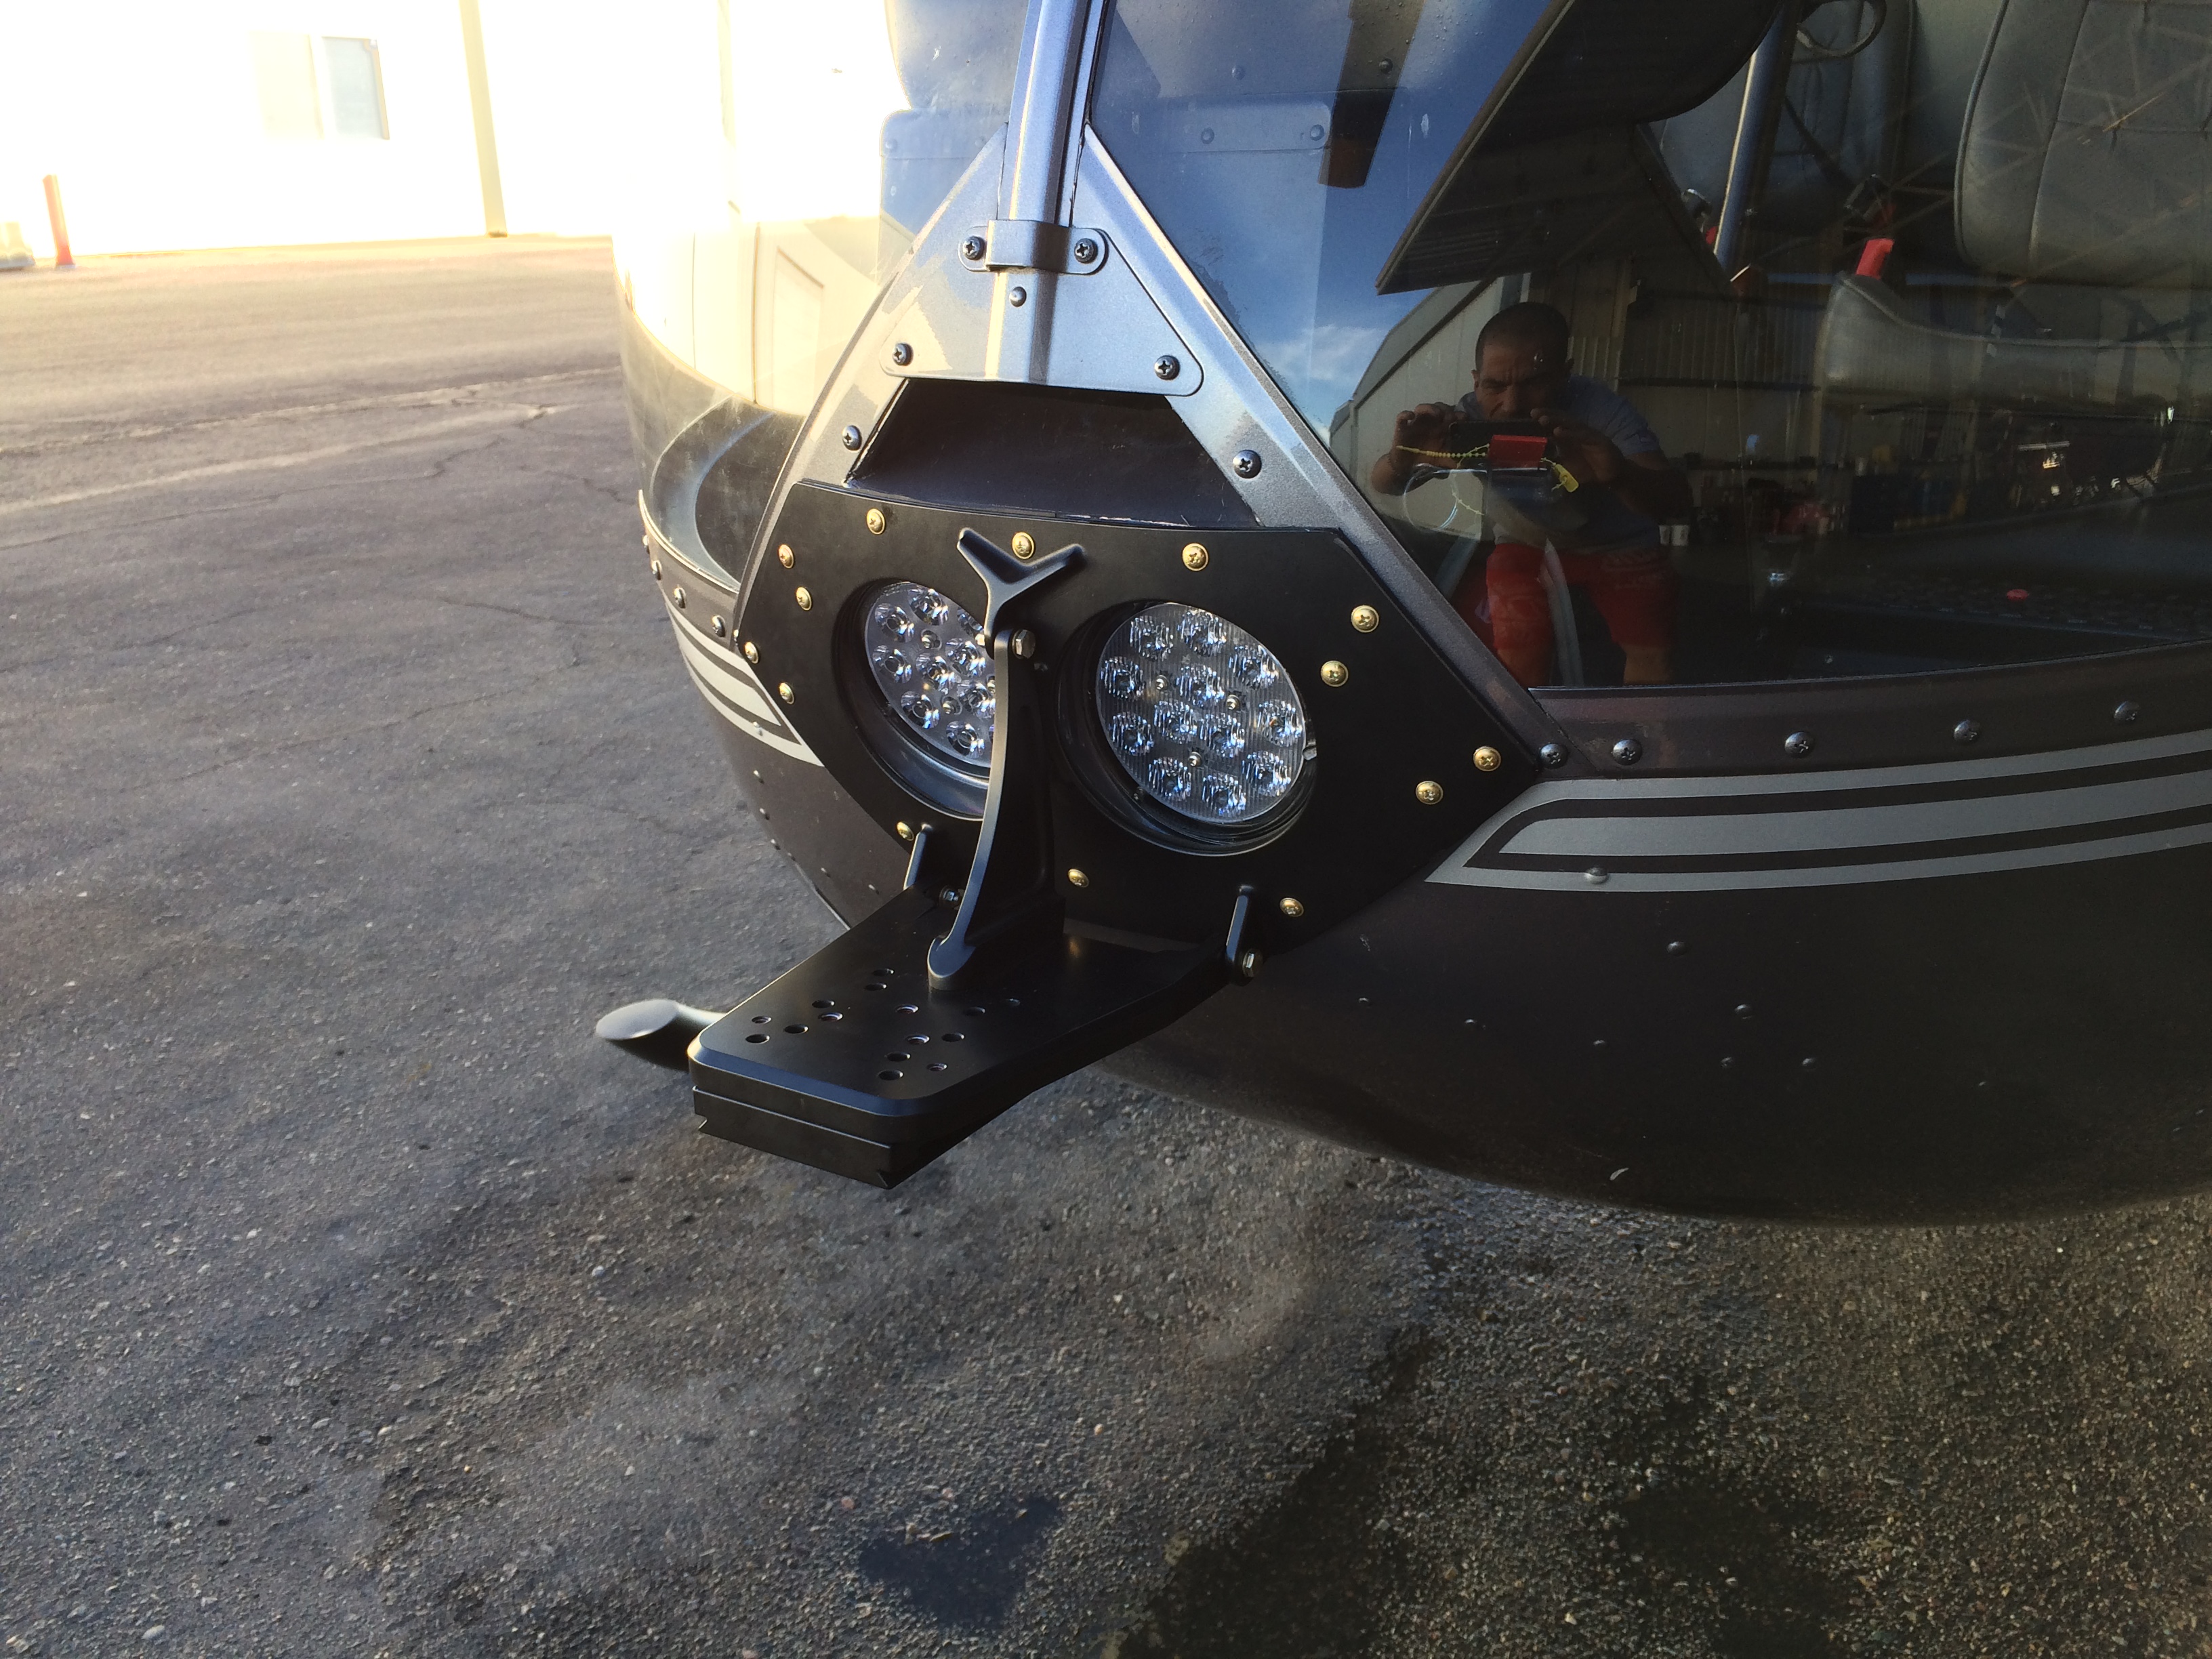 The nose mount is best used for attaching camera systems, antennae, searchlights, and more to the helicopter. Meeker Aviation Photo